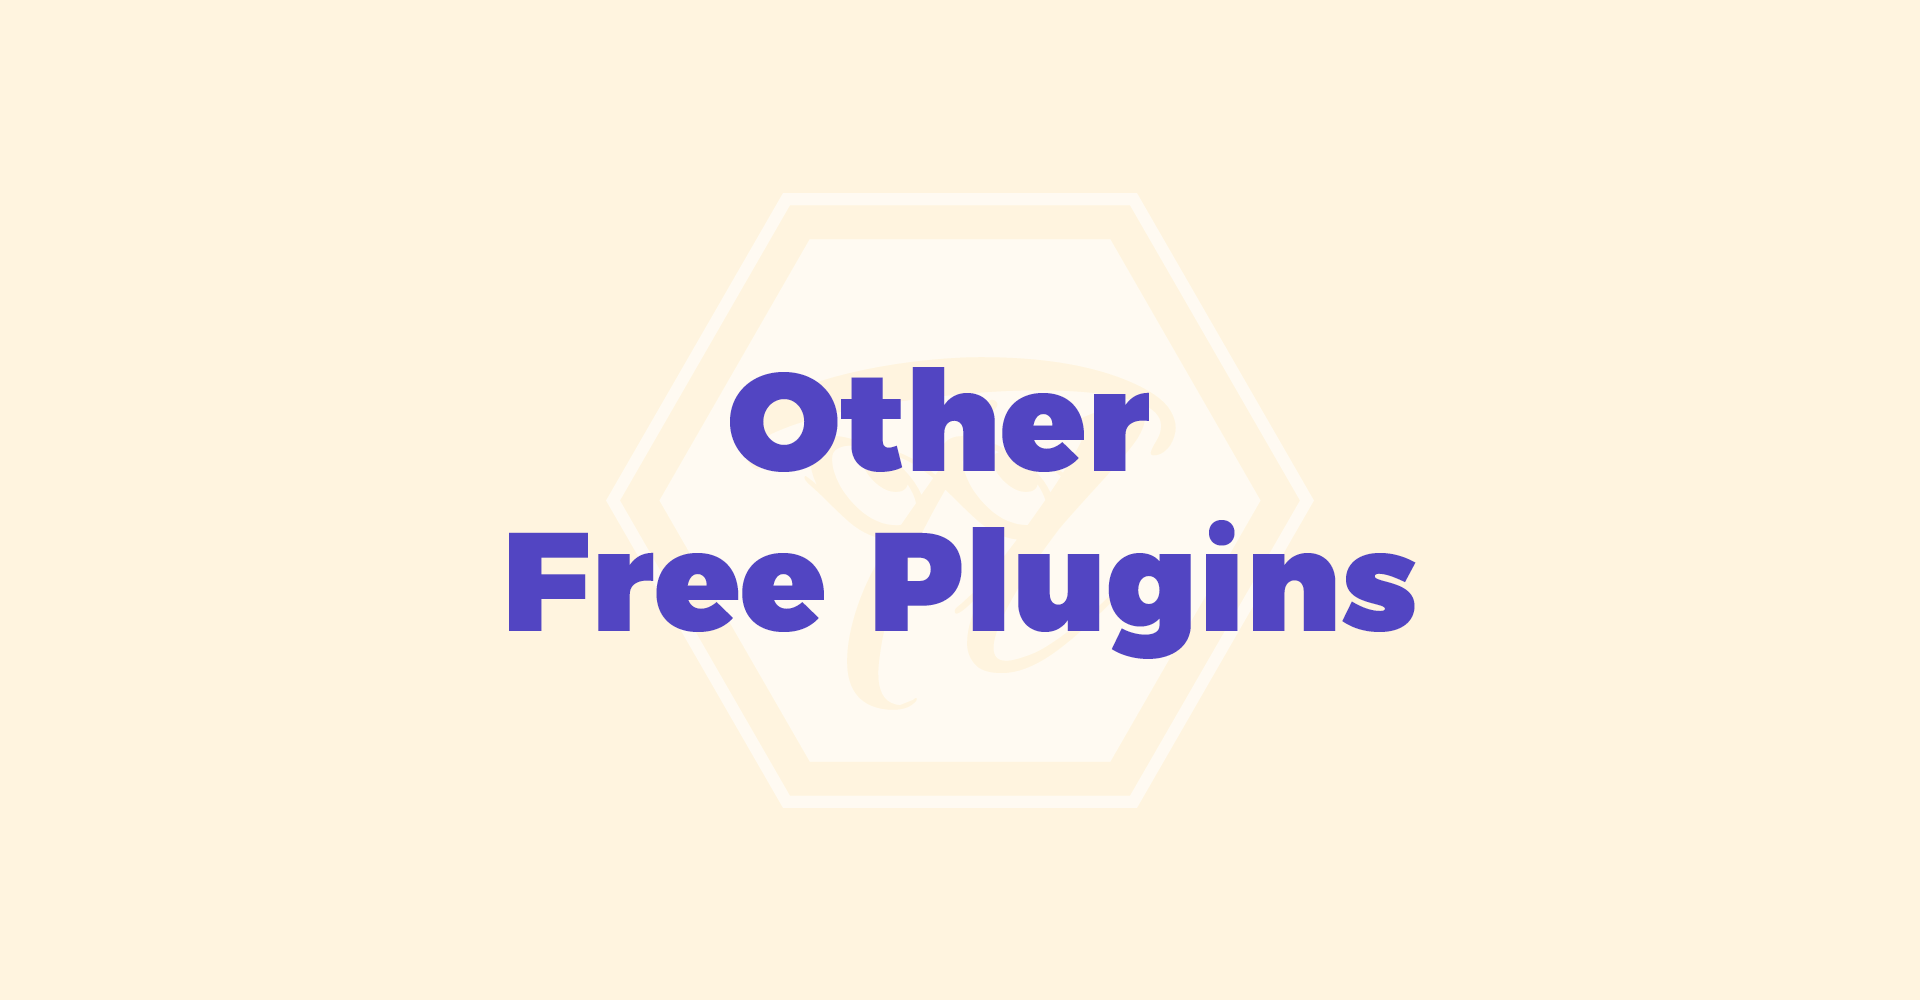 other_free_plugins 1 1 2